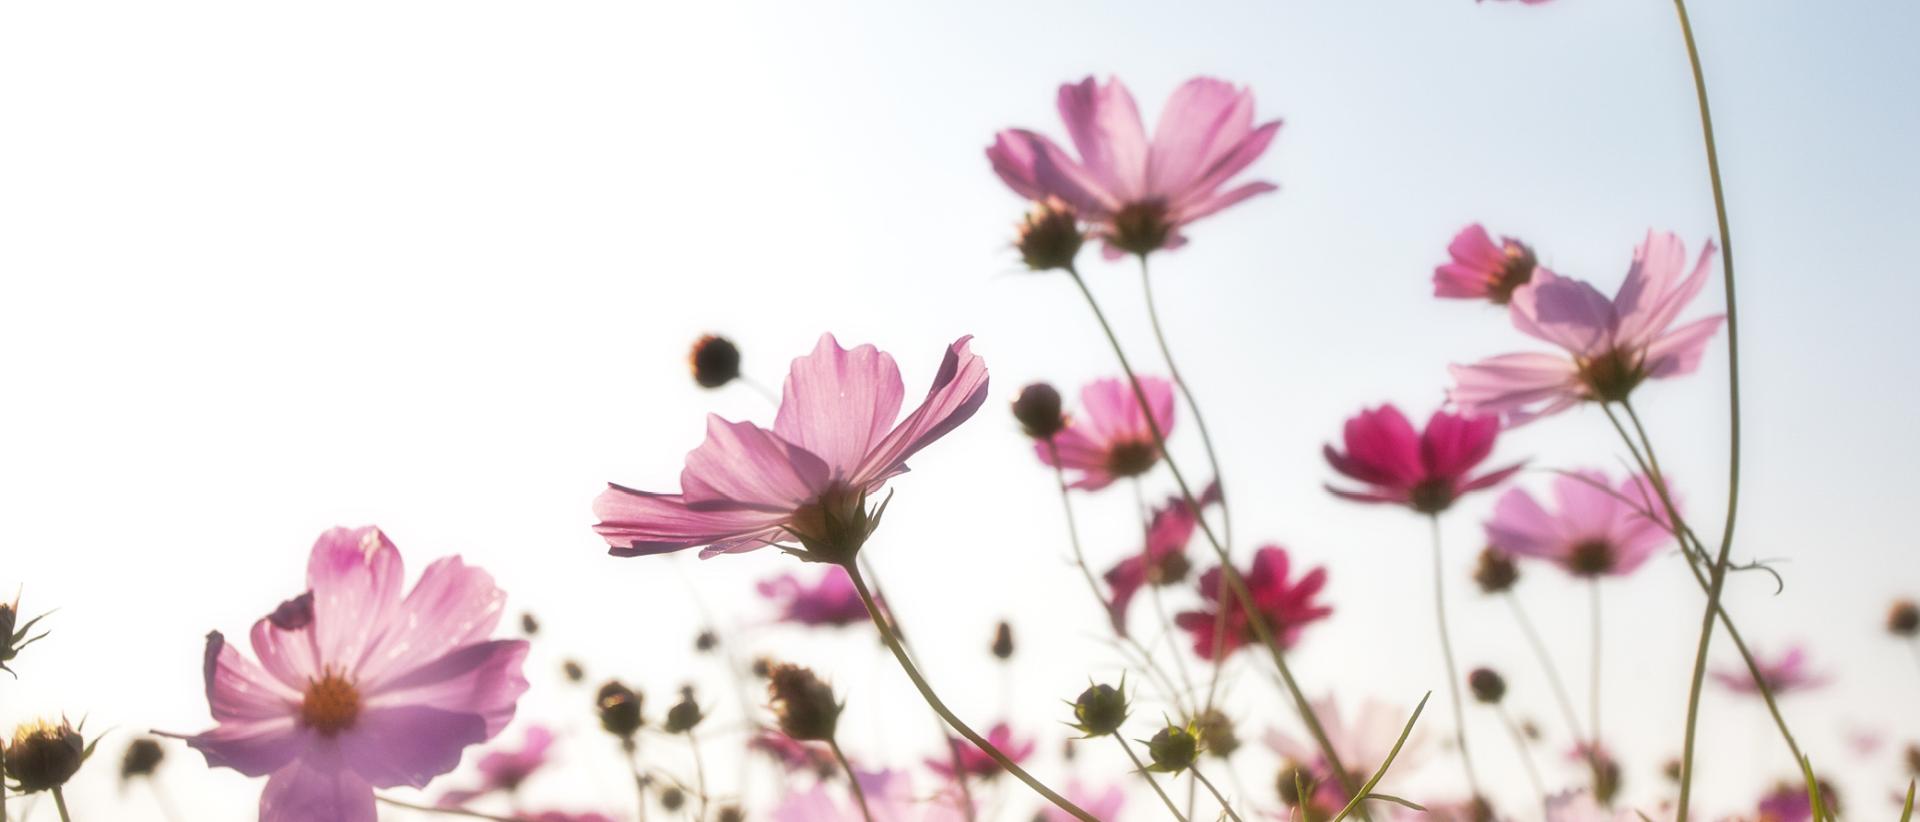 Pink flowers in a field against a blue sky